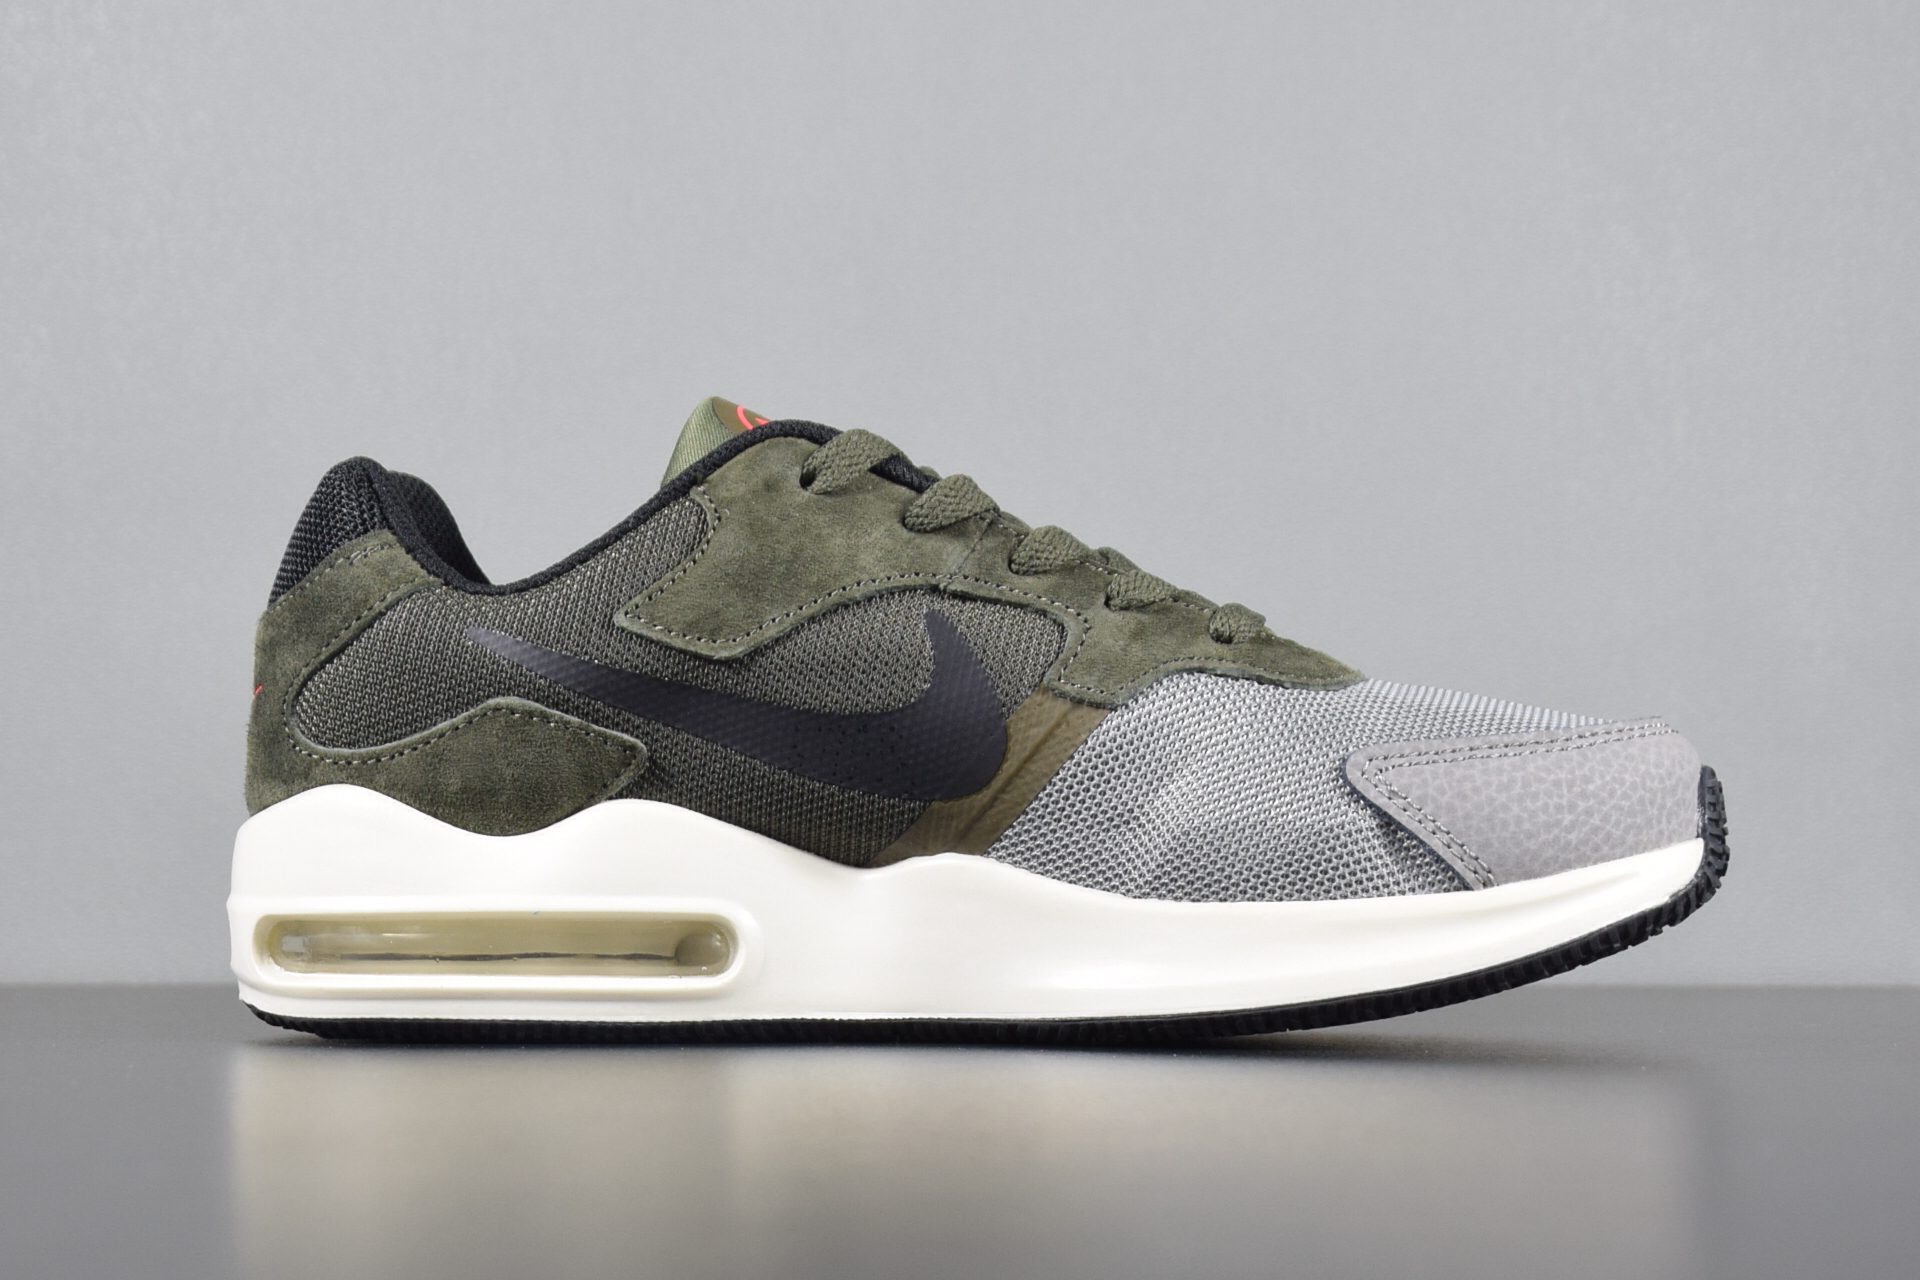 Nike Air Max Guile Army Green Grey Shoes